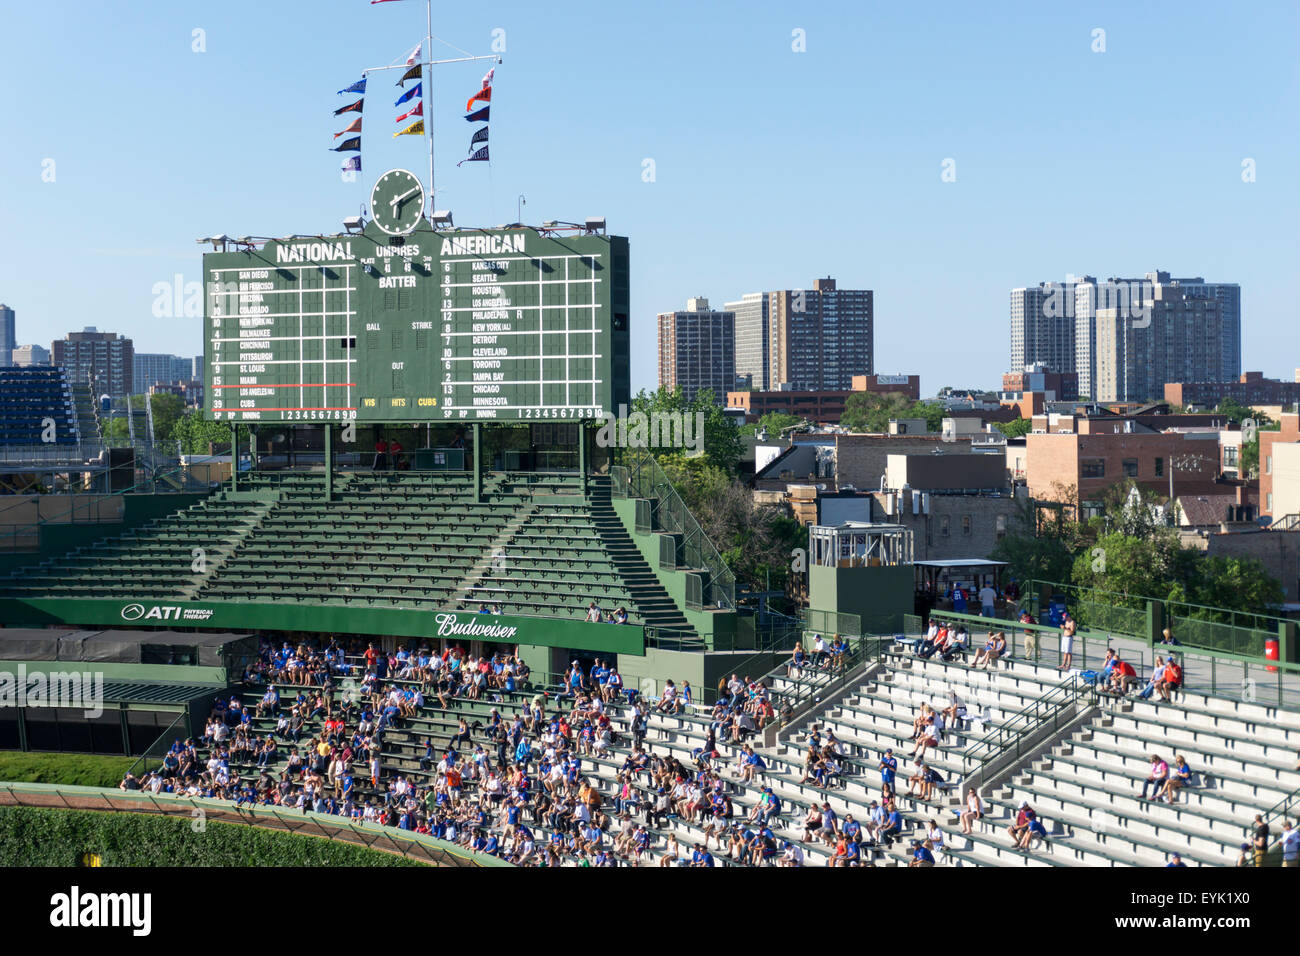 Wrigley Field baseball ground, the home of the Chicago Cubs. Stock Photo